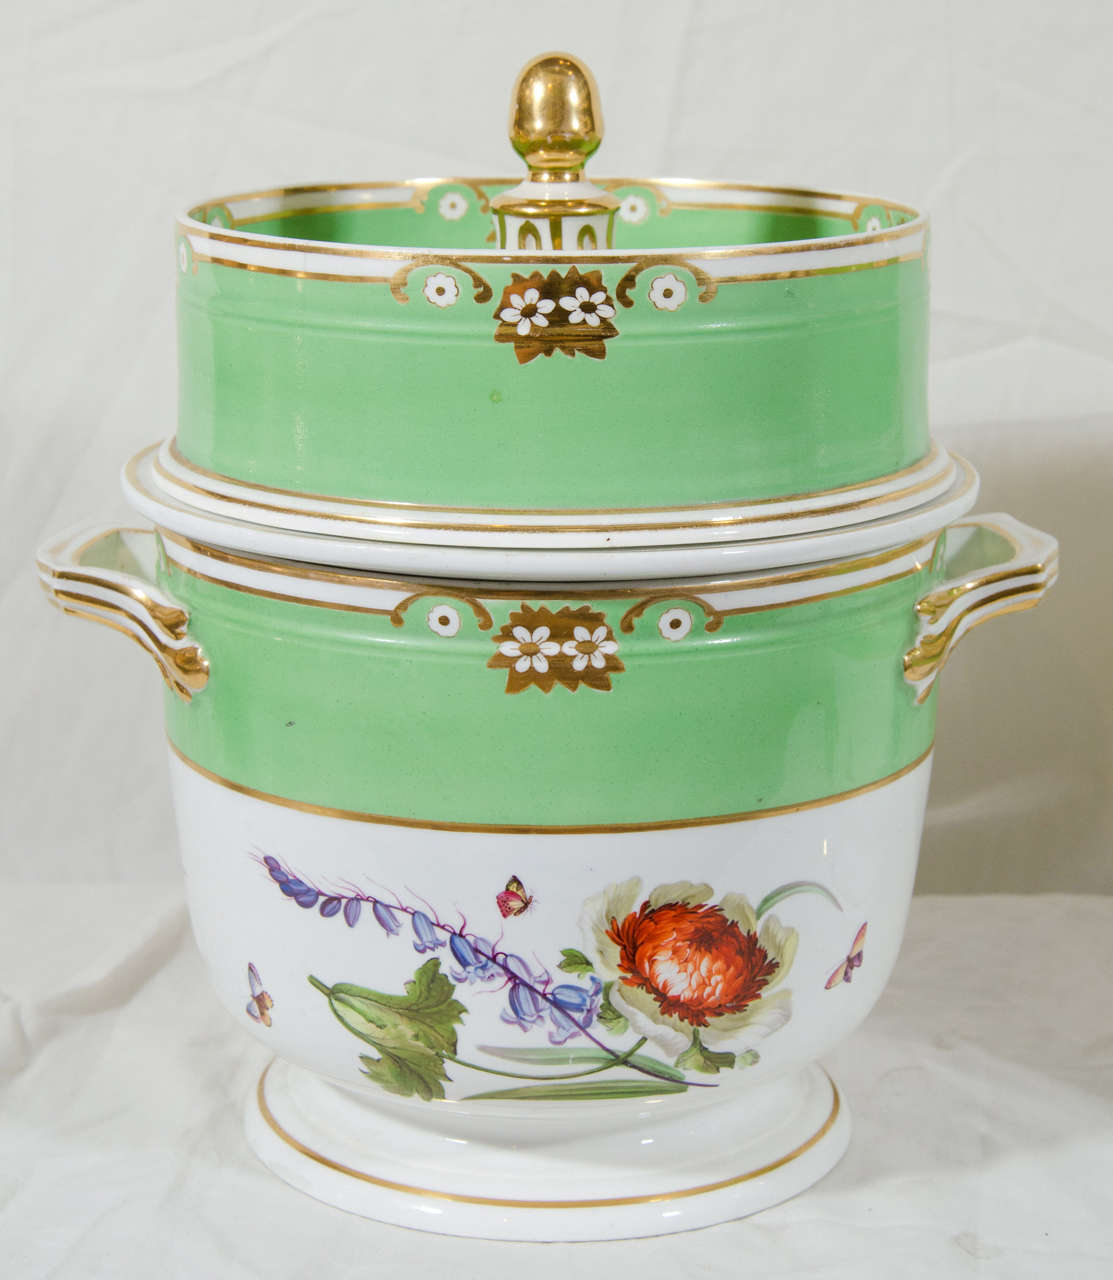 A lovely pair of Derby porcelain ice cream pails (fruit coolers) decorated with hand-painted flowers and broad bands of apple green.
Made in three pieces ice cream pails were commonly placed on the sideboard and used for serving iced cream mixed